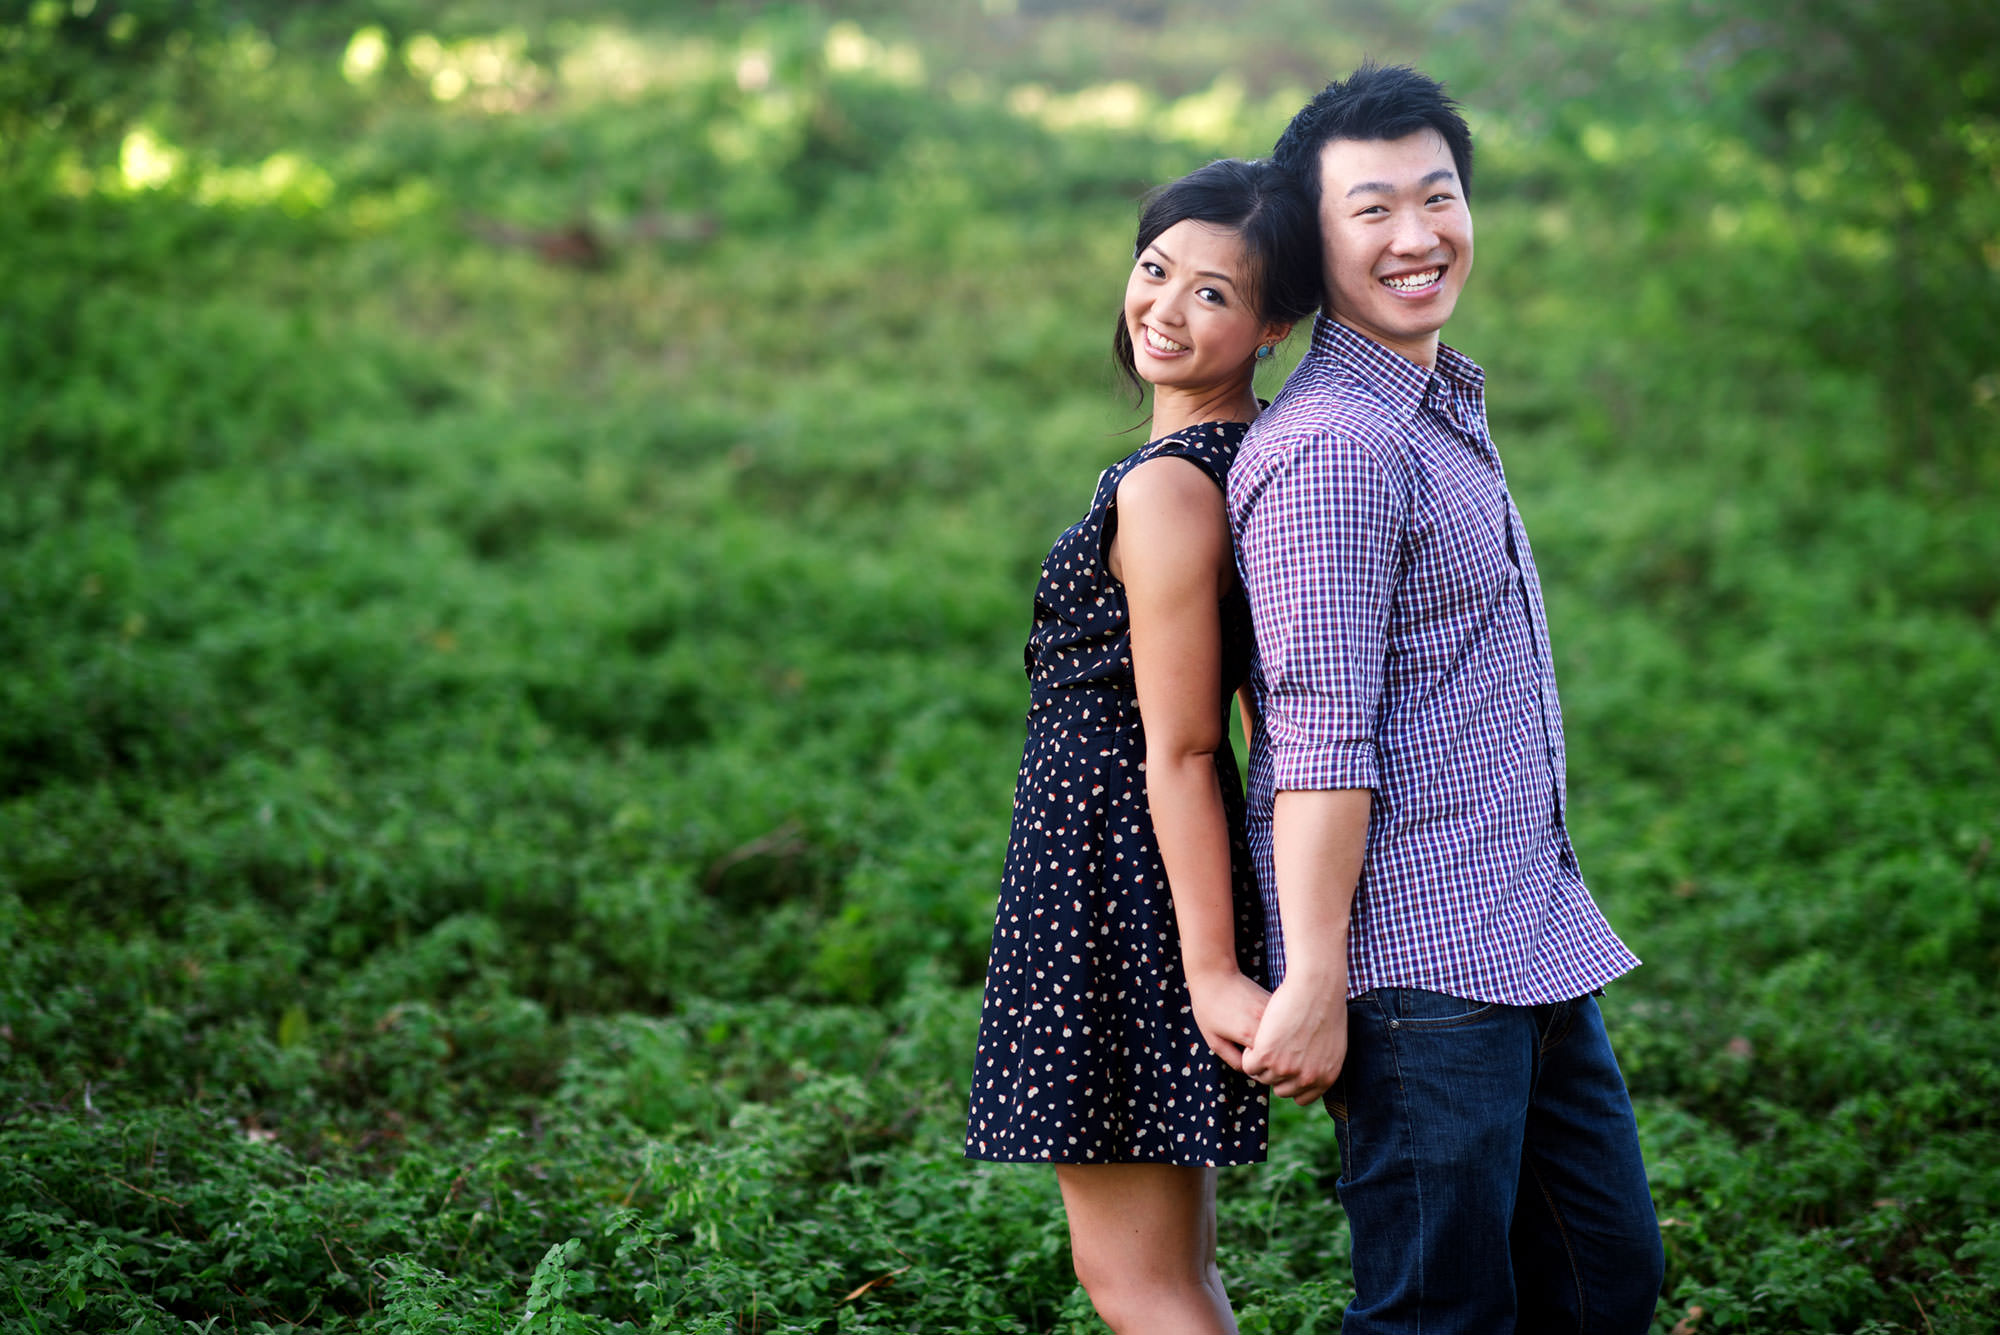 They hold hands in centennial park for their portrait session